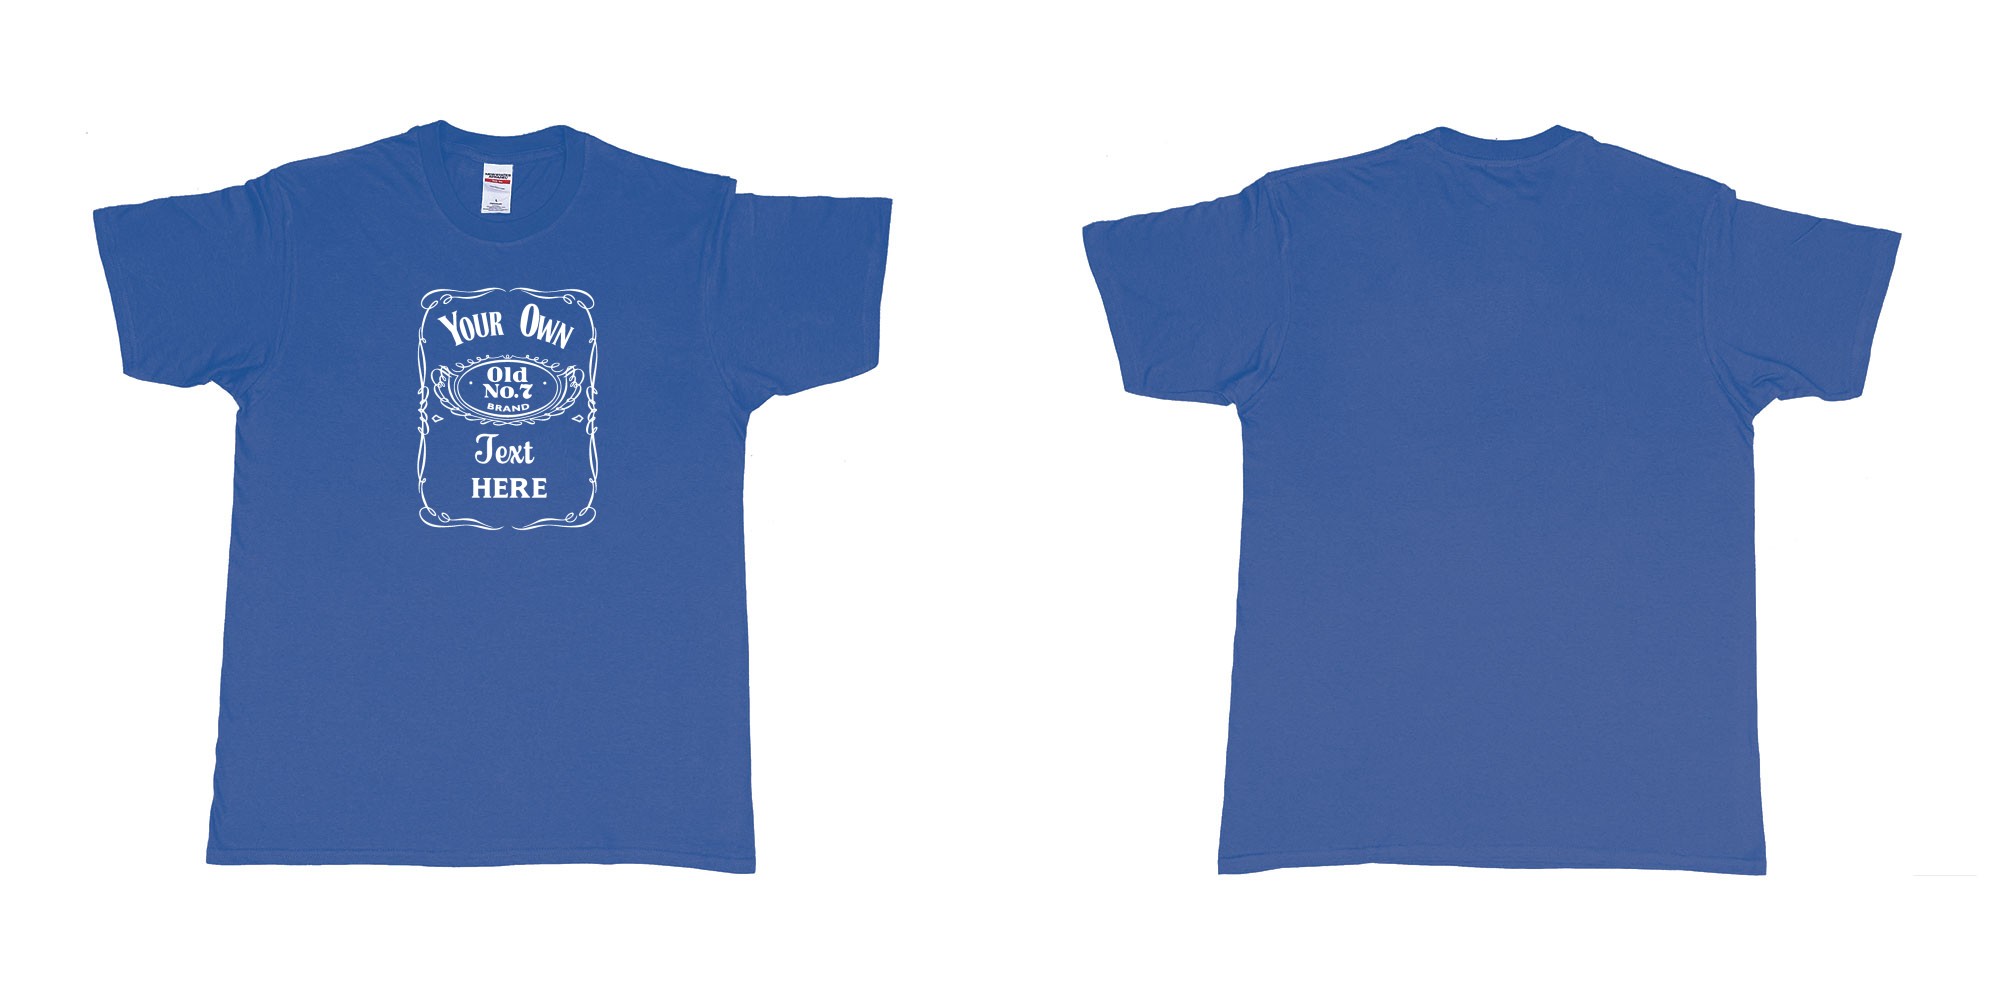 Custom tshirt design Jack Daniels Label in fabric color royal-blue choice your own text made in Bali by The Pirate Way